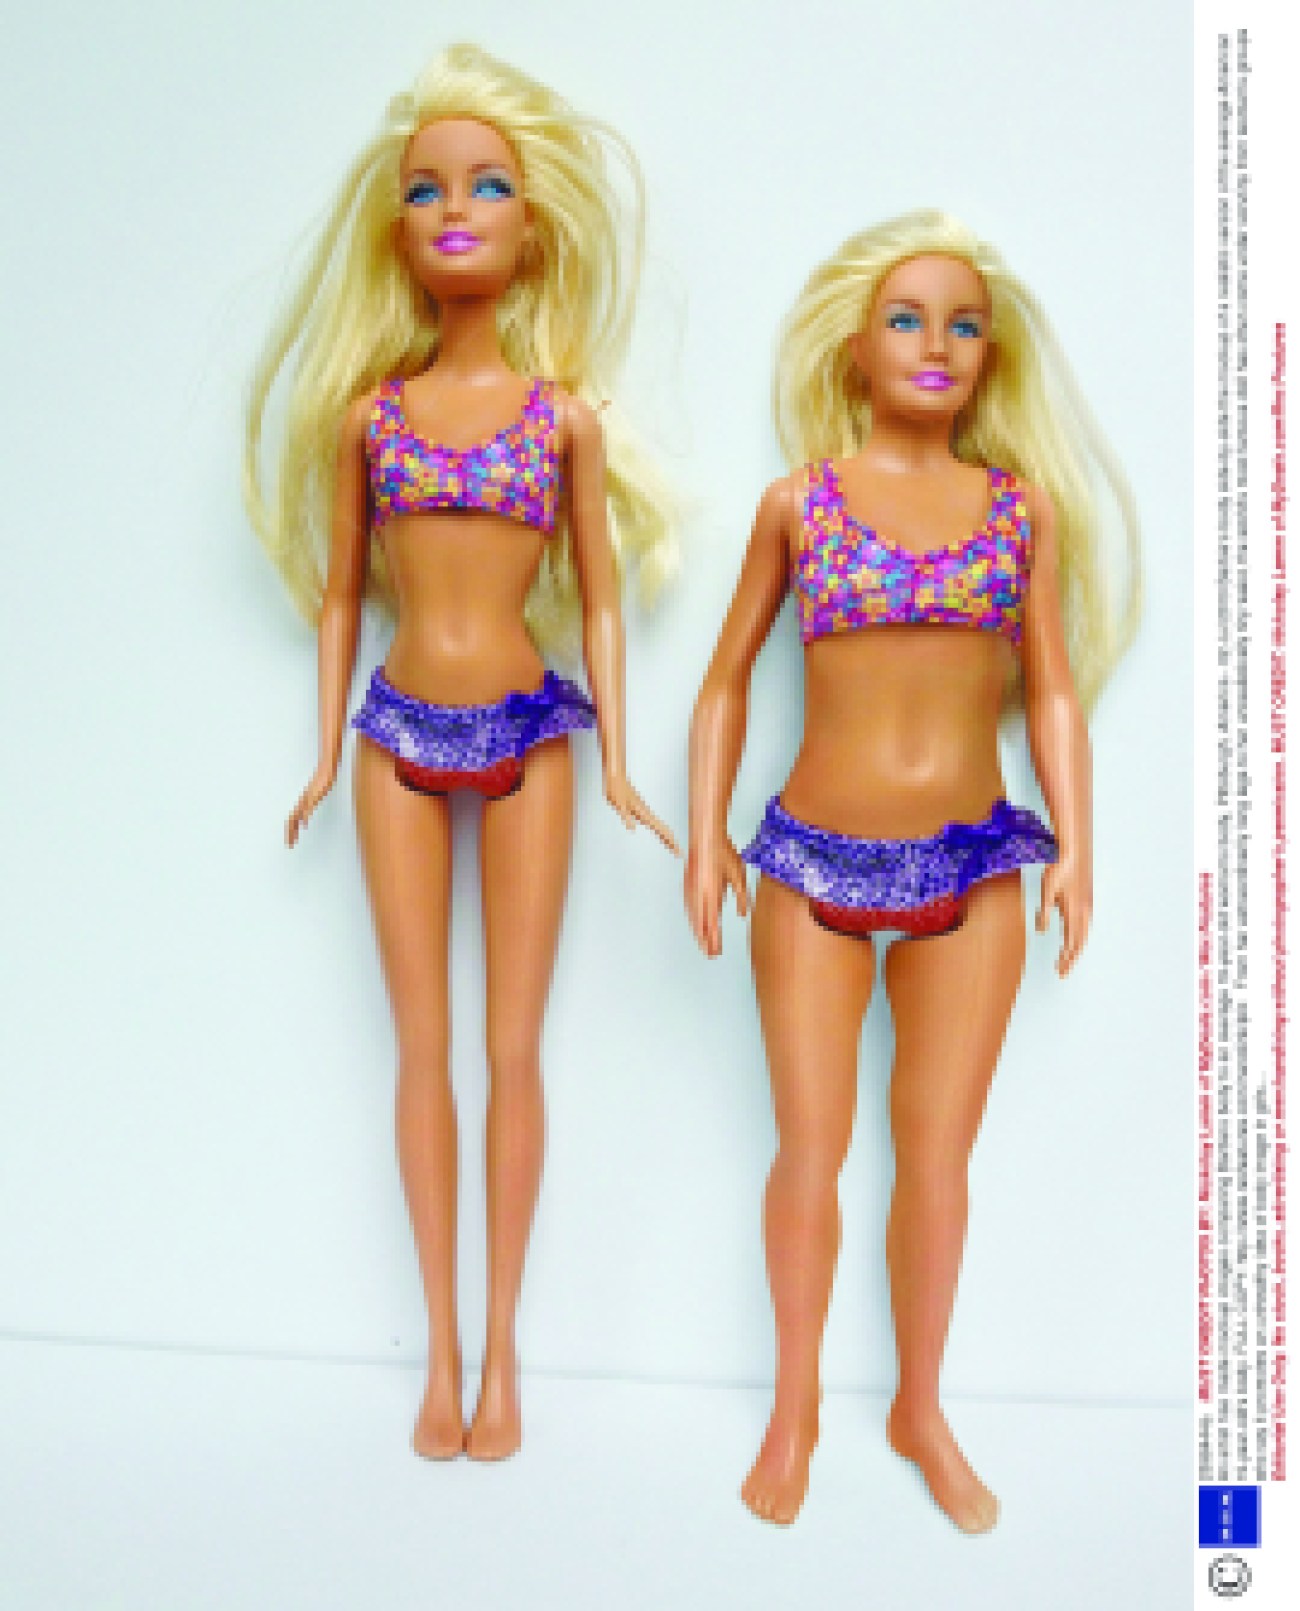 An artist has made mockup images comparing Barbie's body to an average 19-year-old woman's body, Pittsburgh, America - 02 Jul 2013